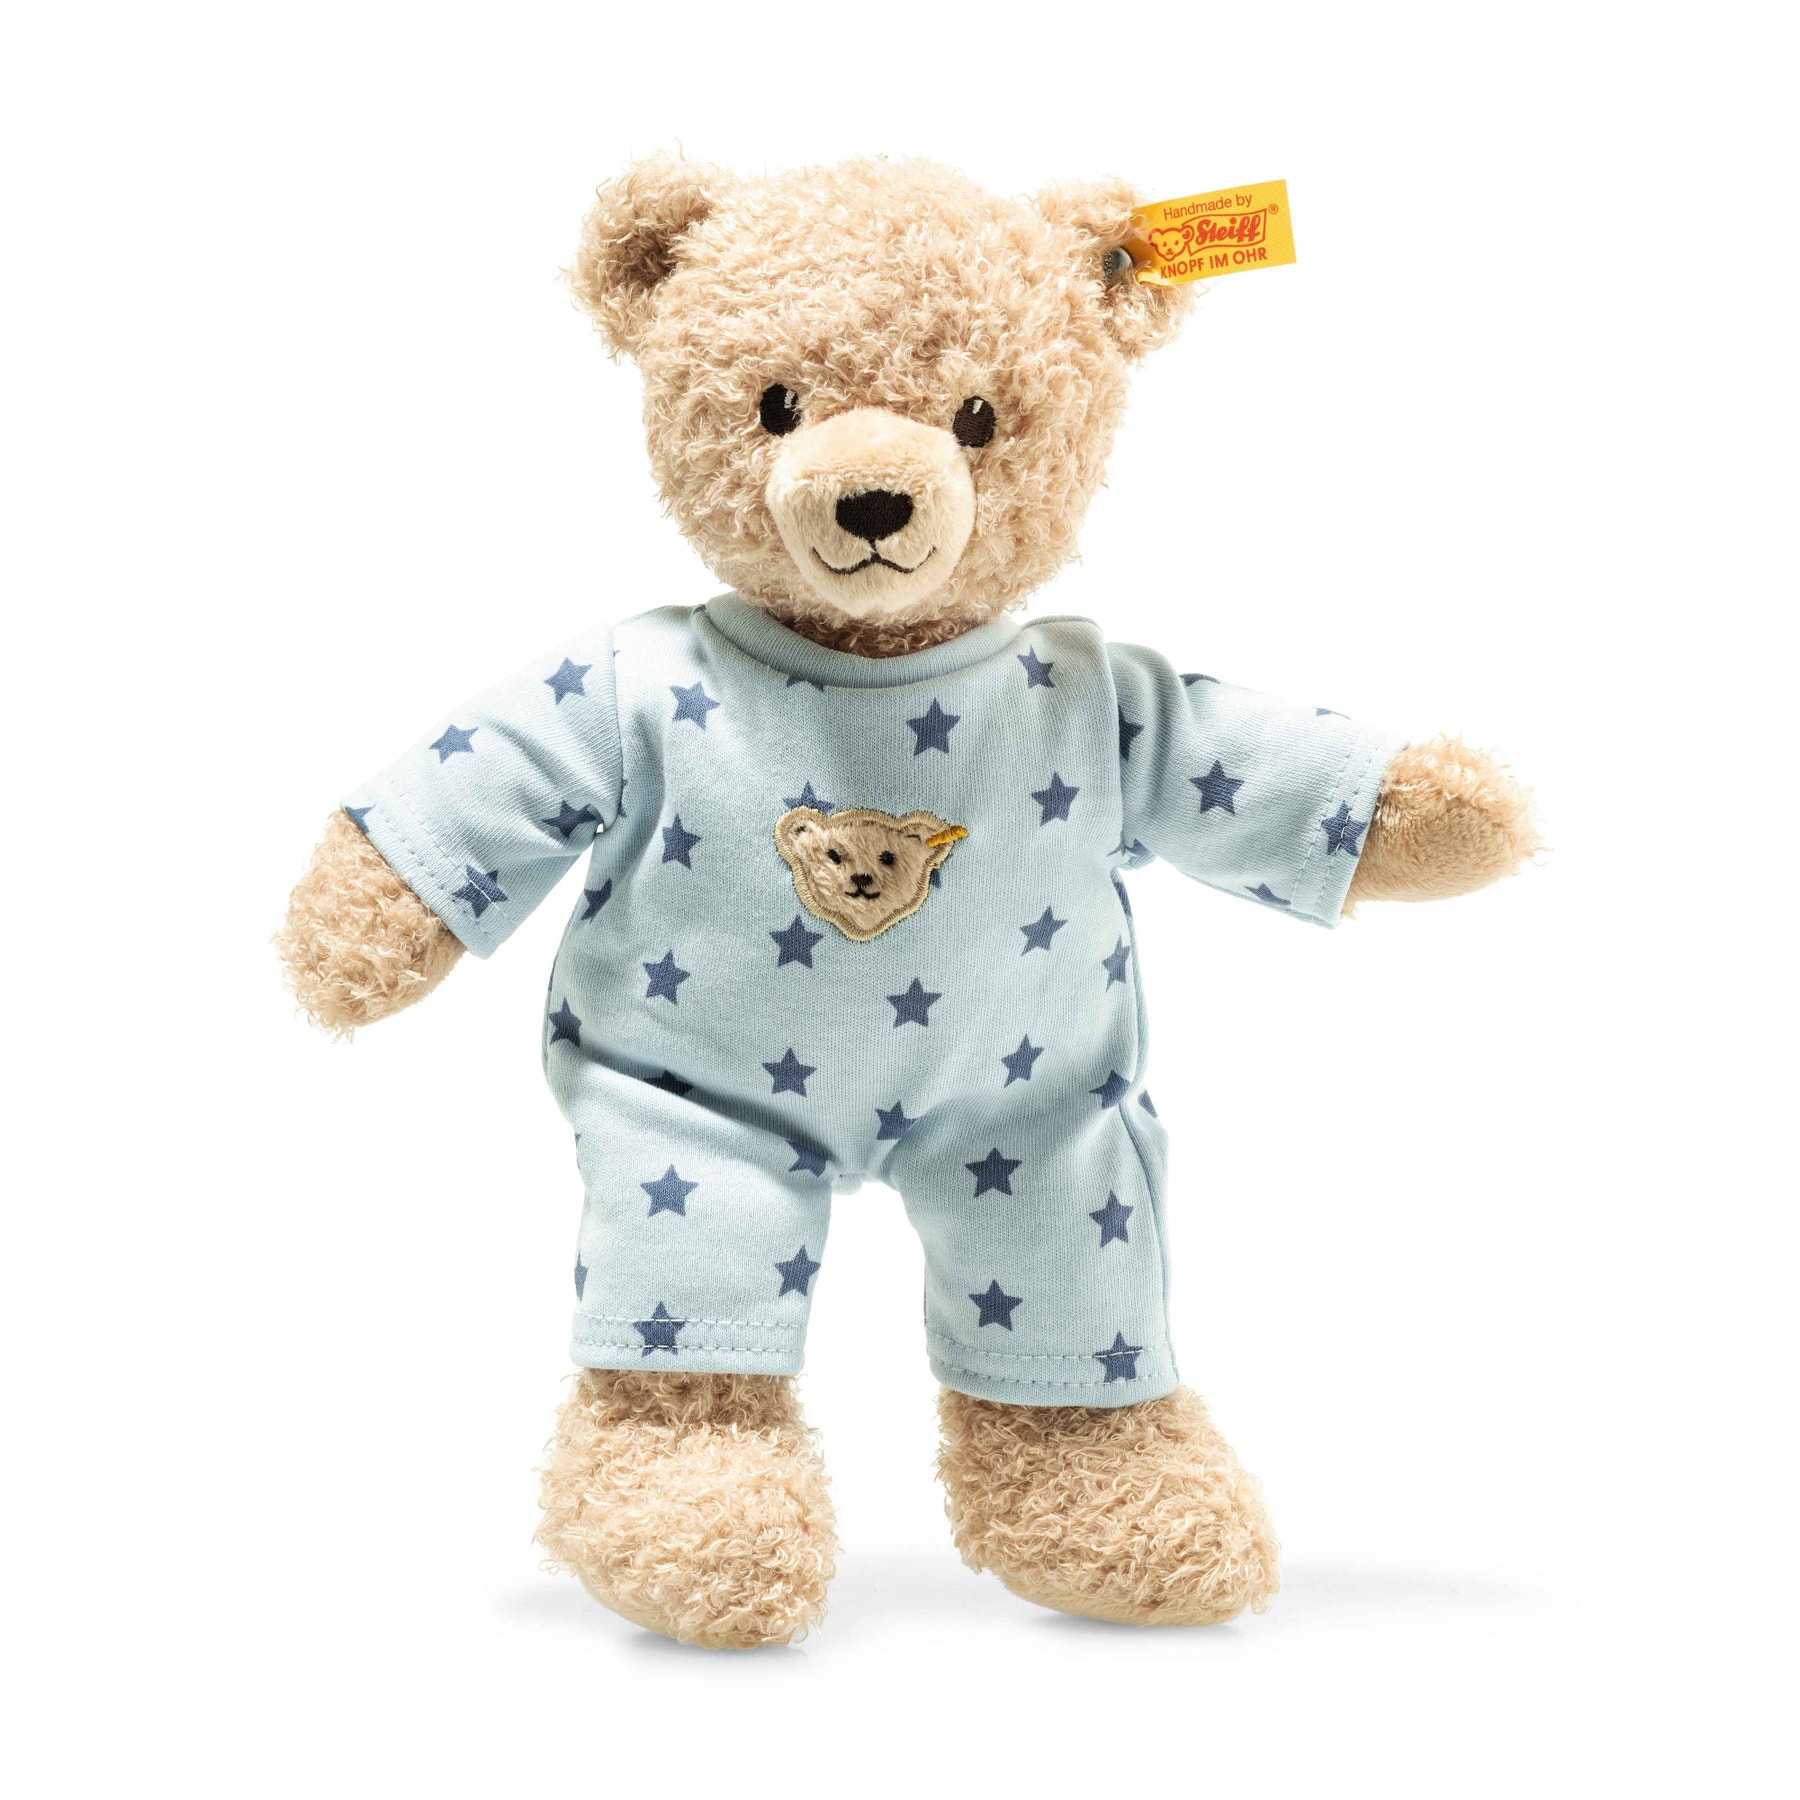 "Teddy and Me" Baby Bear in Blue Pajamas